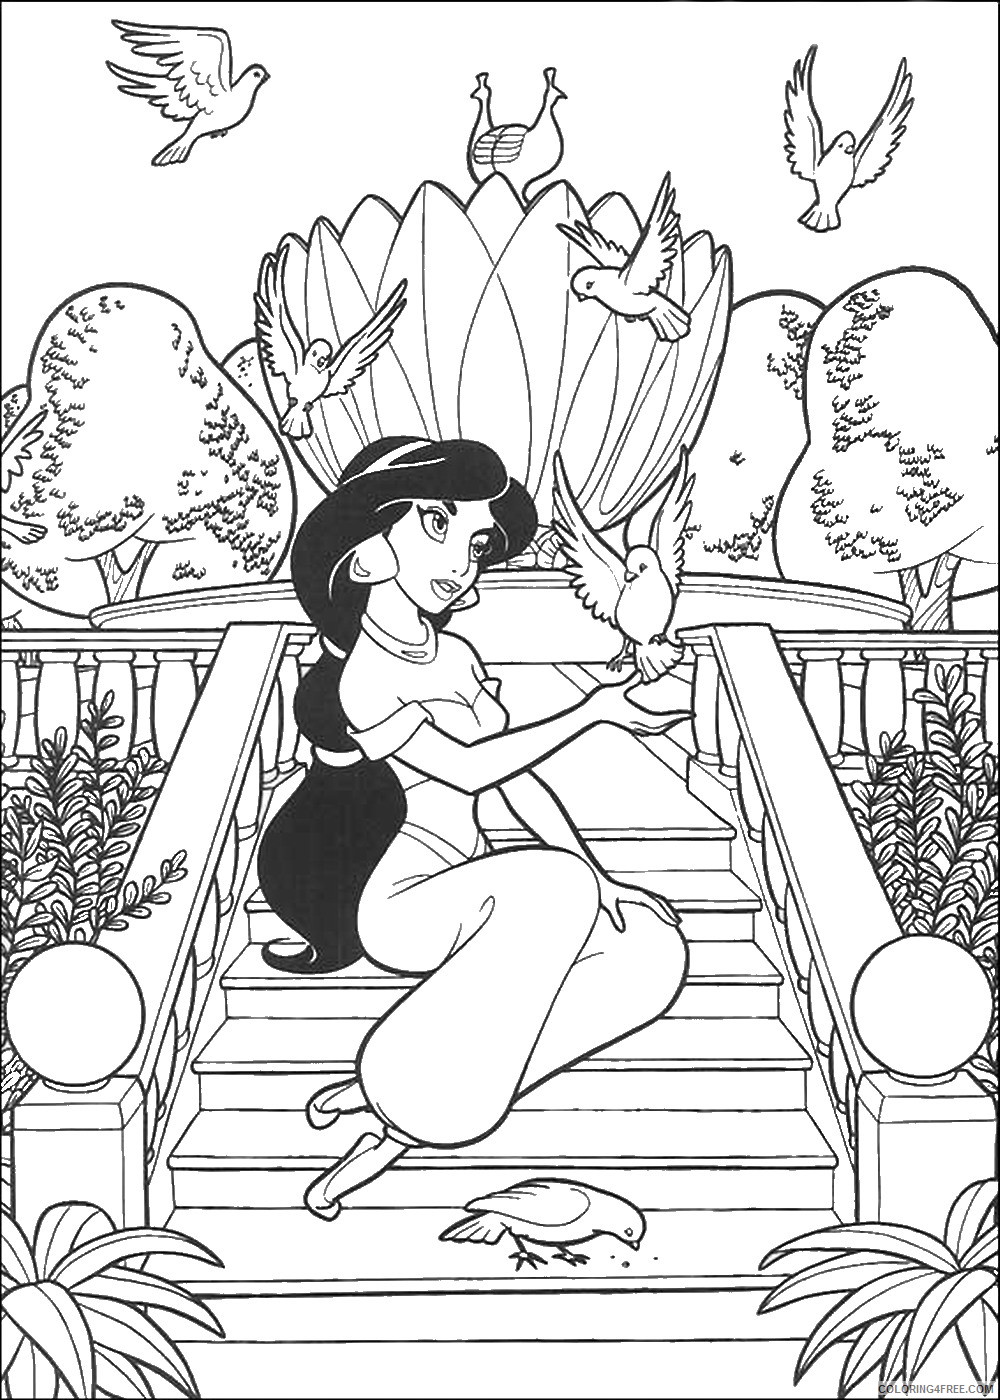 Aladdin Coloring Pages Cartoons aladdin_16 Printable 2020 0294 Coloring4free